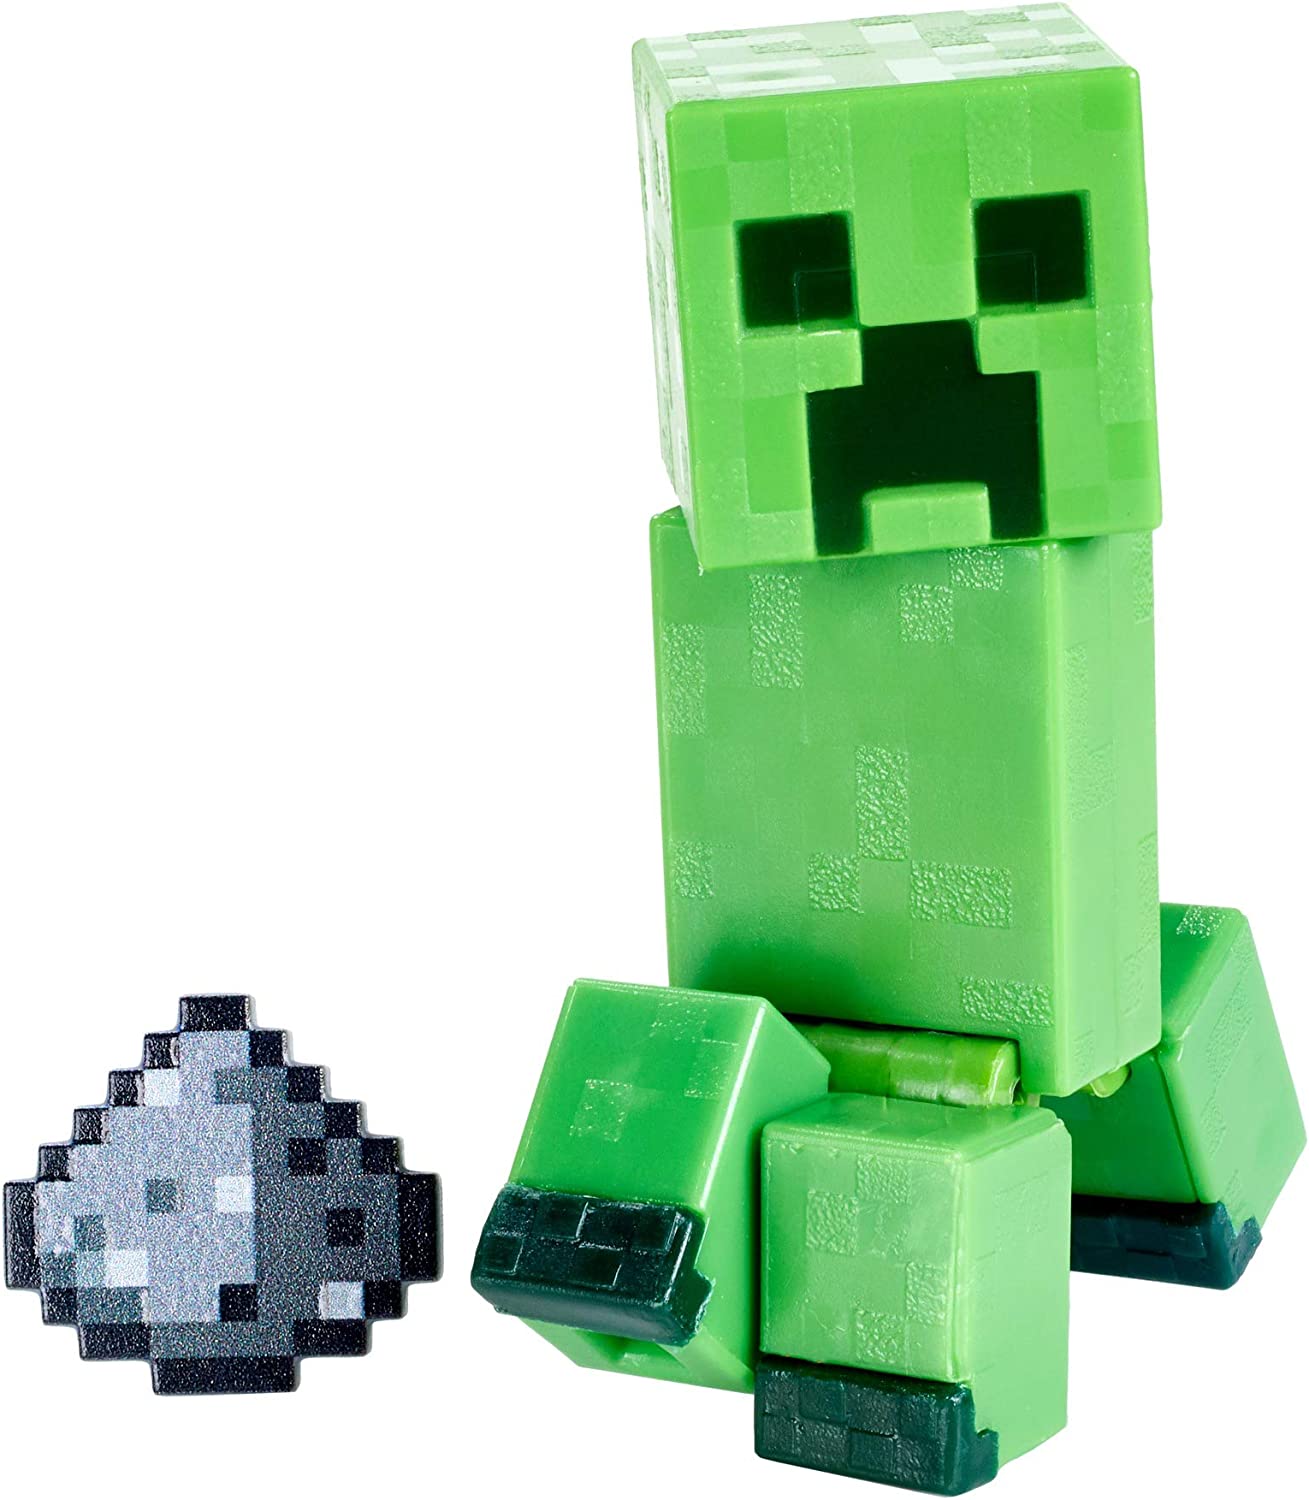 Minecraft 3 Inch Mini Figure - Creeper with Accessory and Craft-a-Block